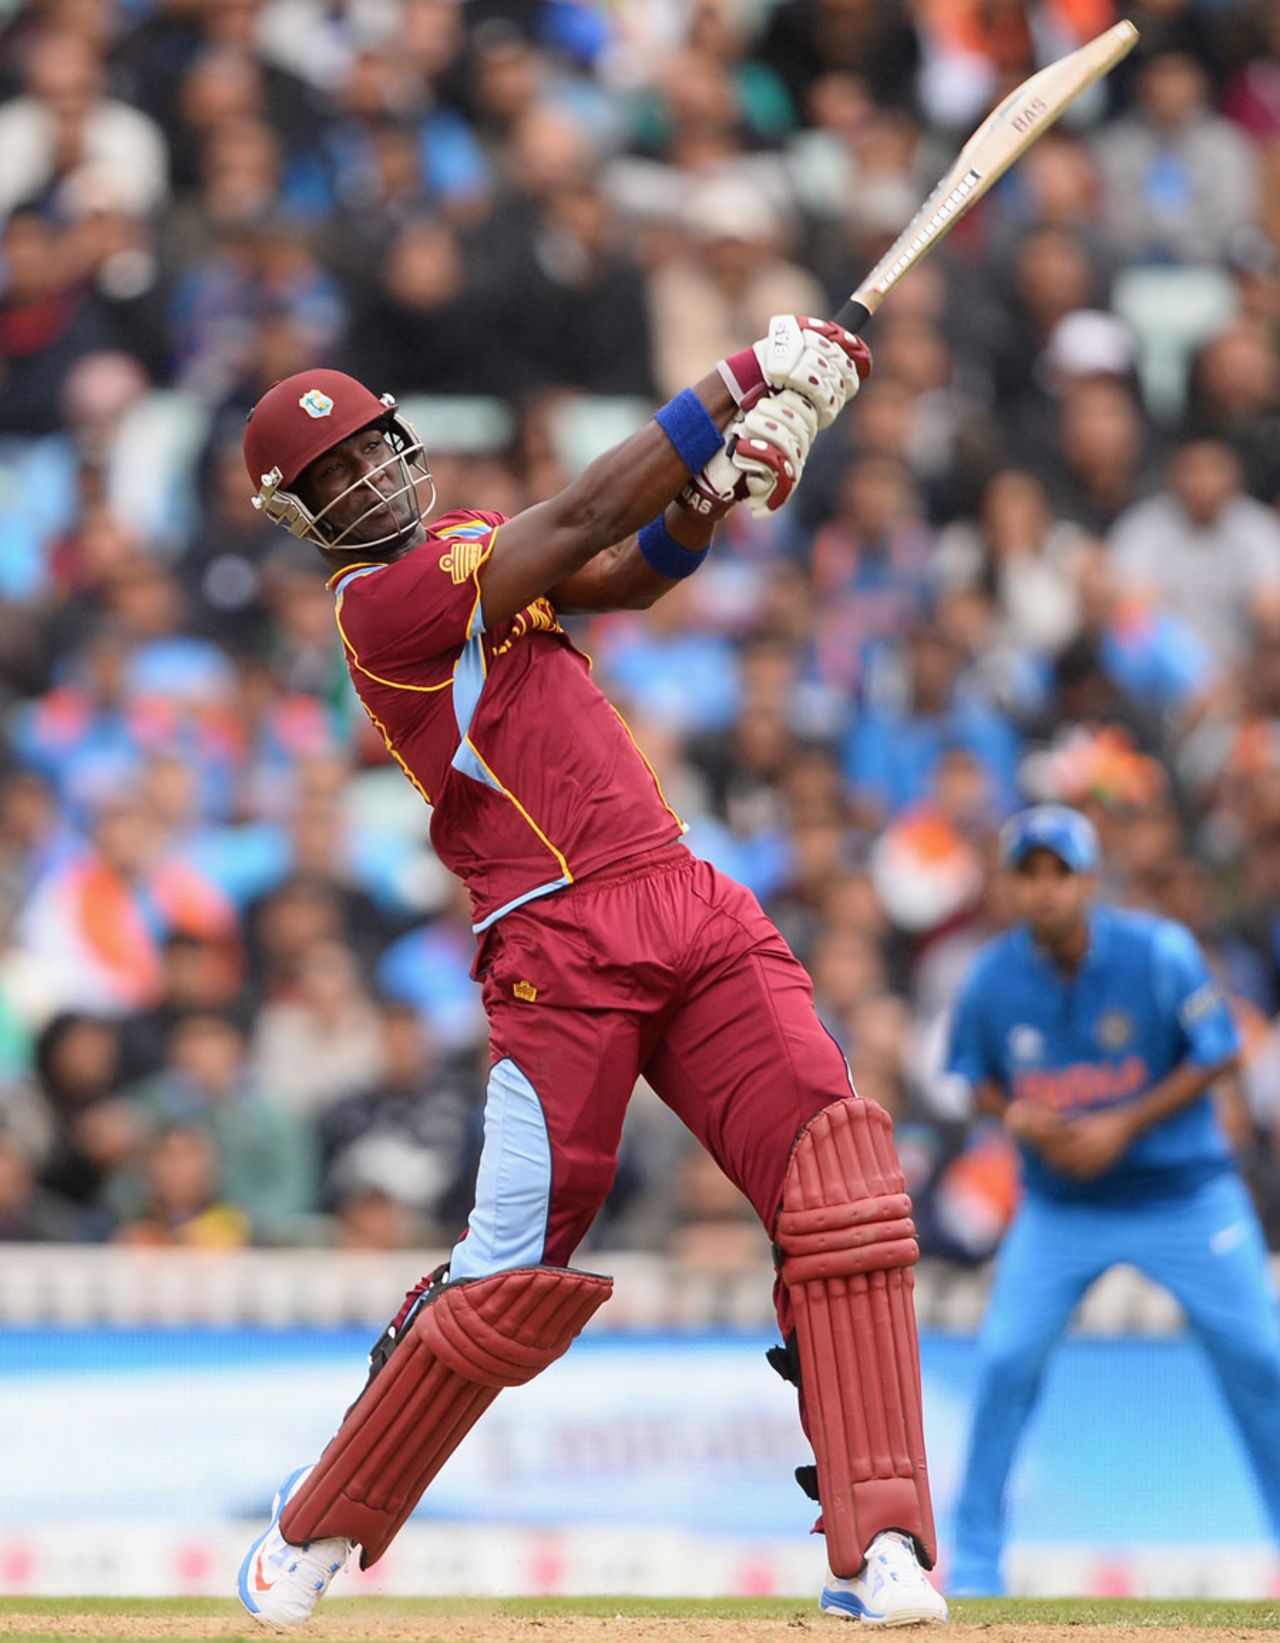 Darren Sammy whacks one out of the ground, India v West Indies, Champions Trophy, Group B, The Oval, June 11, 2013